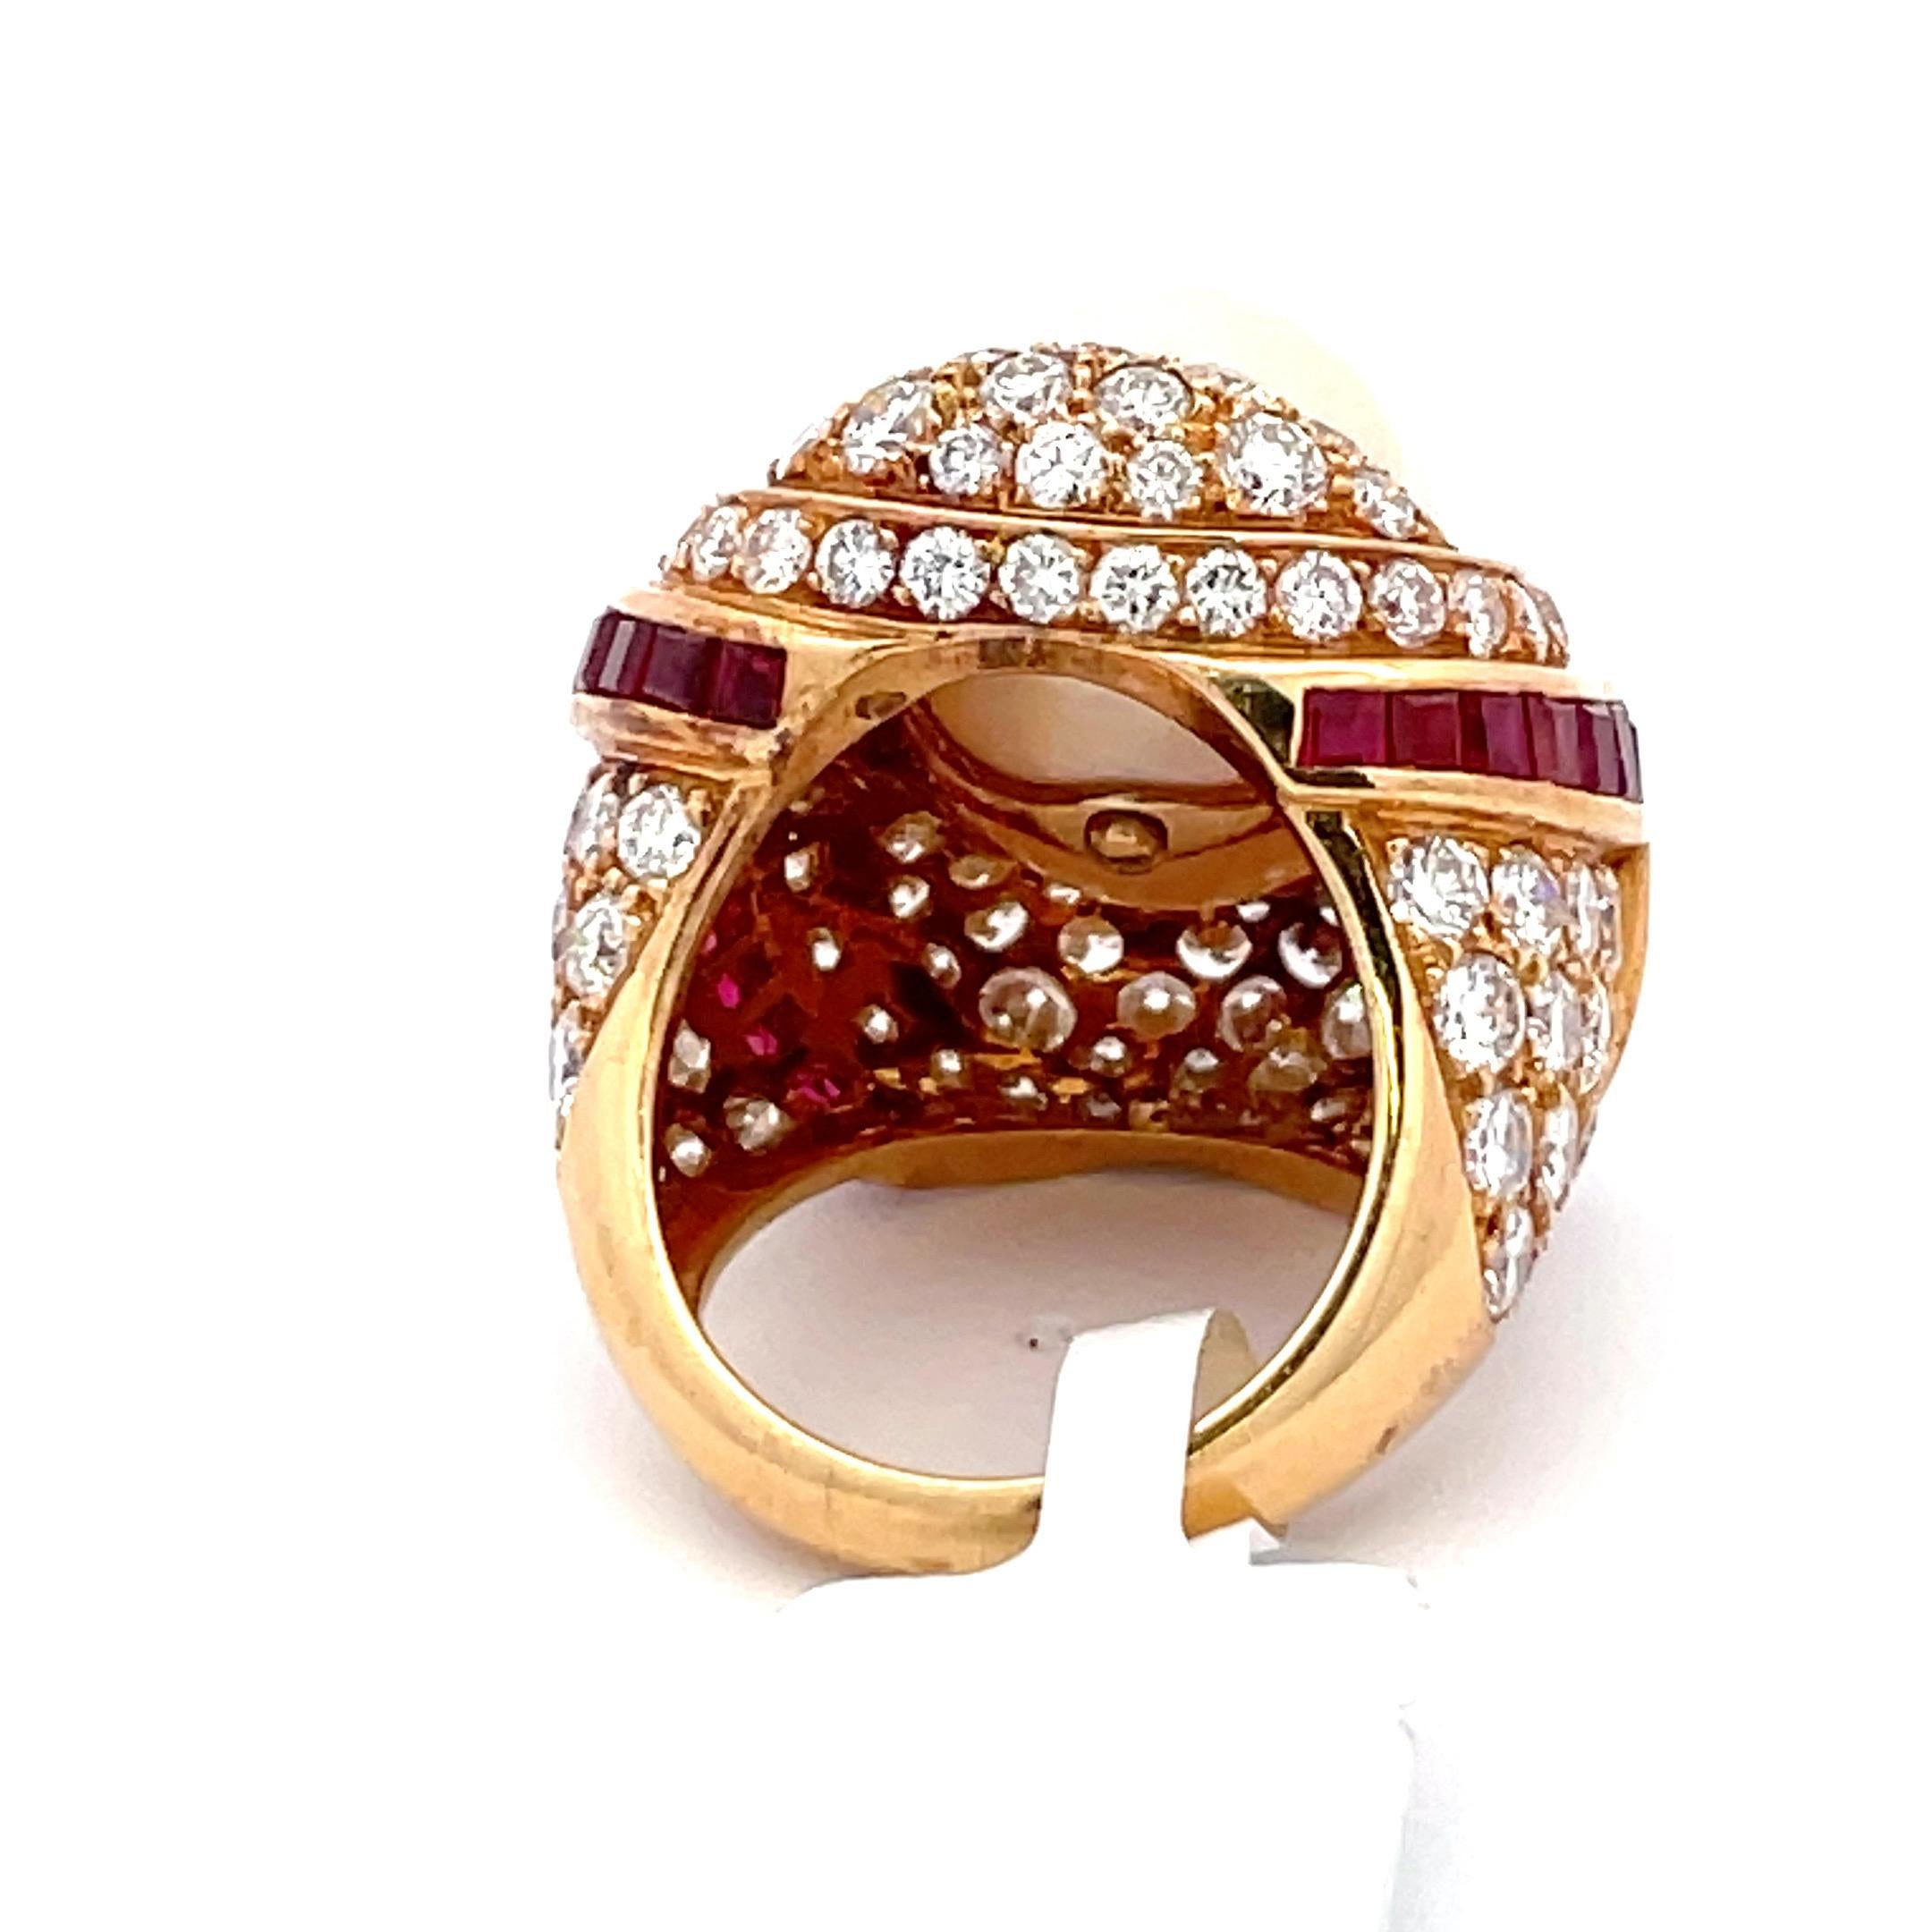 Contemporary Mauboussin Paris GIA Certified South Sea Pearl Diamond Ruby Dome Cocktail Ring 